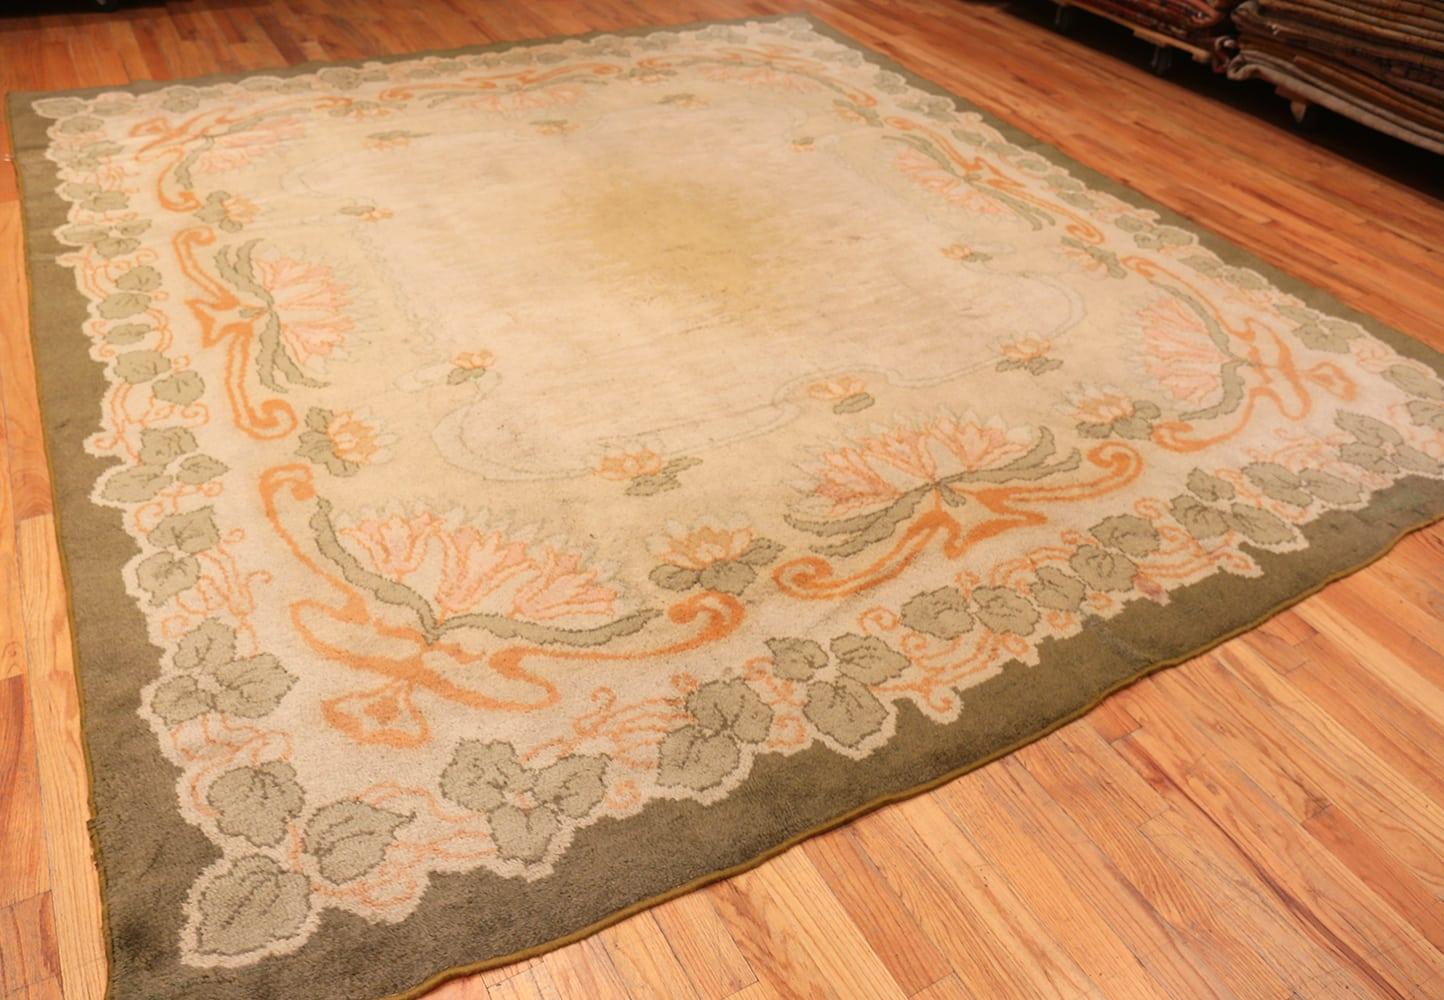 Beautiful Antique Irish Art Nouveau Donegal Rug, Country of Origin / Rug Type: Irish Rugs, Circa Date: 1920 – Throughout the early 20th century, Donegal, Ireland, established a thriving rug industry producing pieces that reflected Art Nouveau, Art